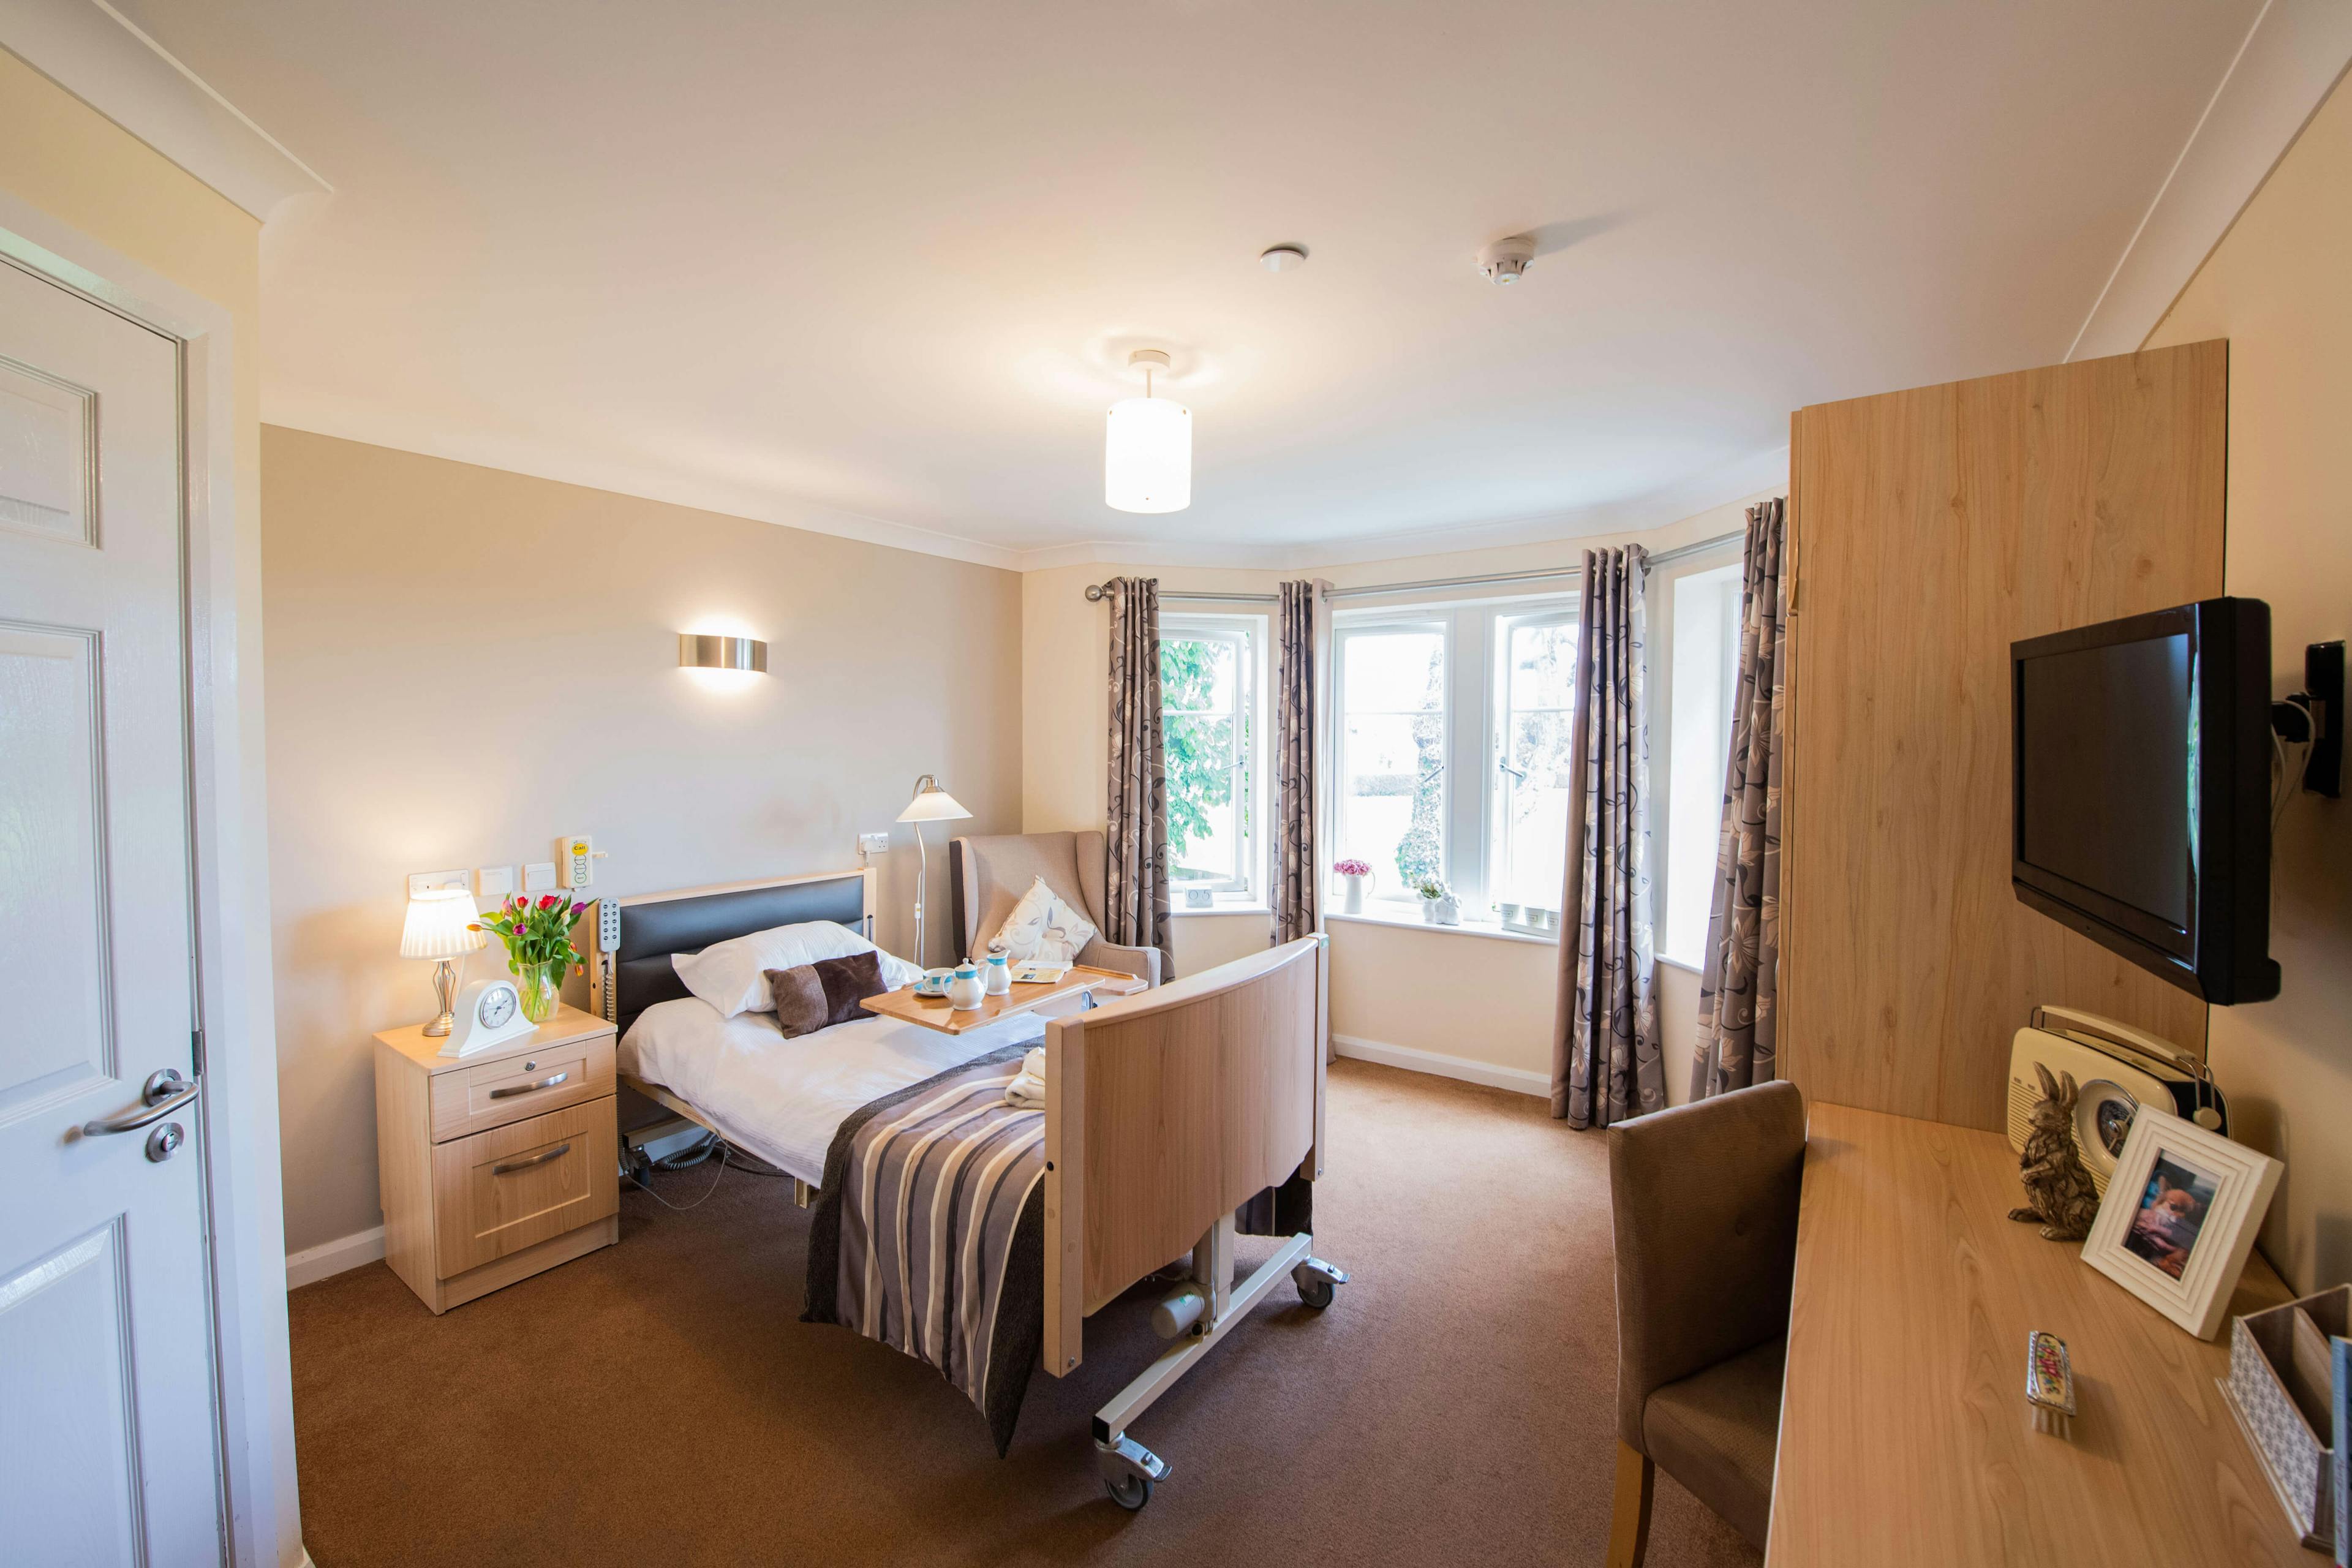 Bedroom at Colne View Care Home in Halstead, Braintree